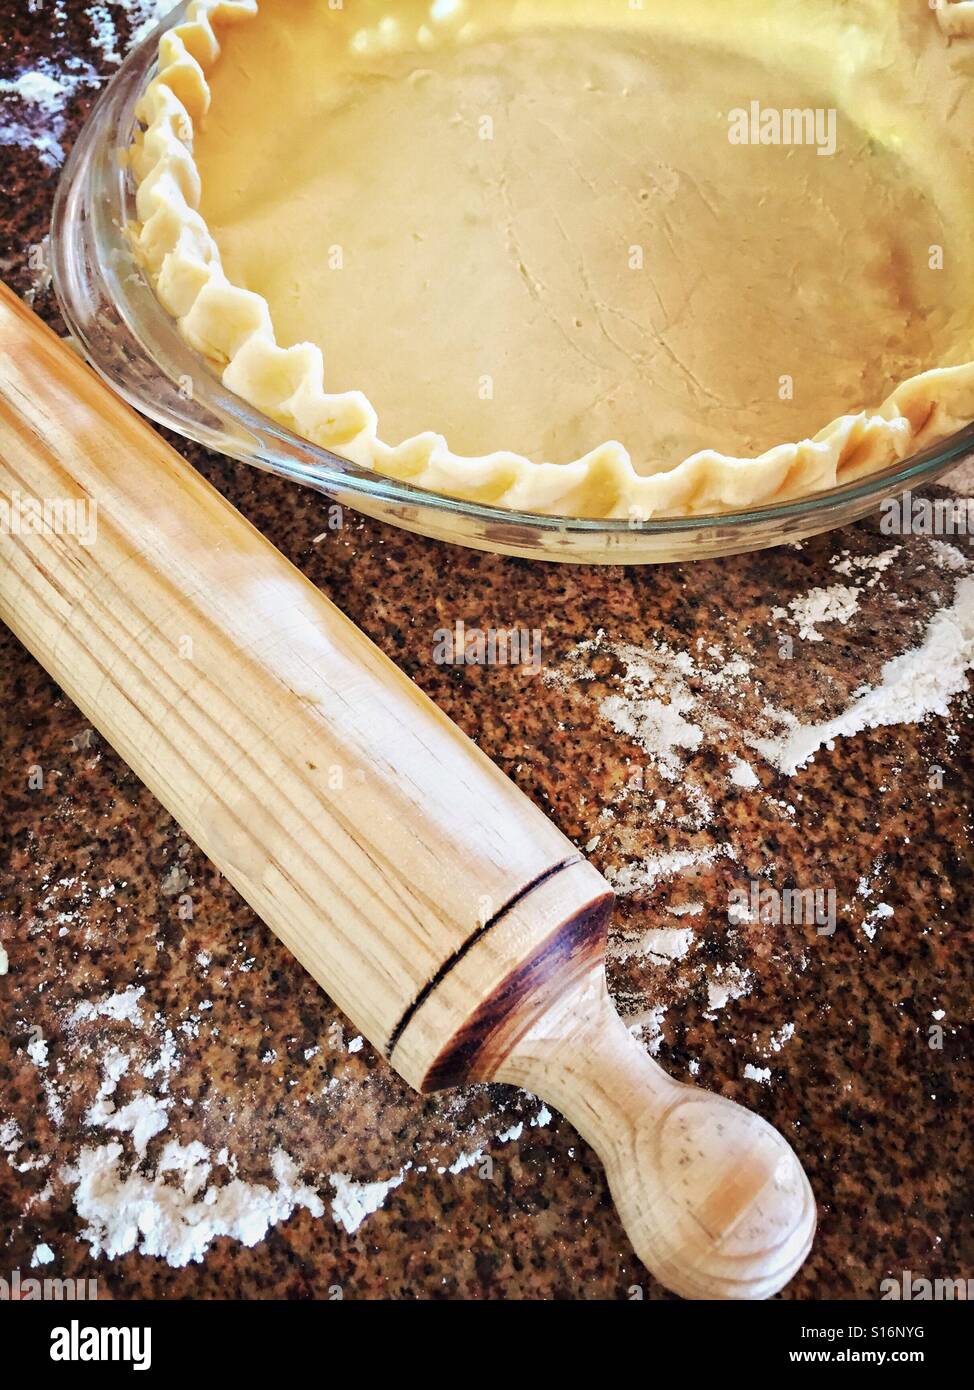 Raw pie dough has been rolled out with a rolling pin and placed inside a pie plate ready to fill and bake. Stock Photo